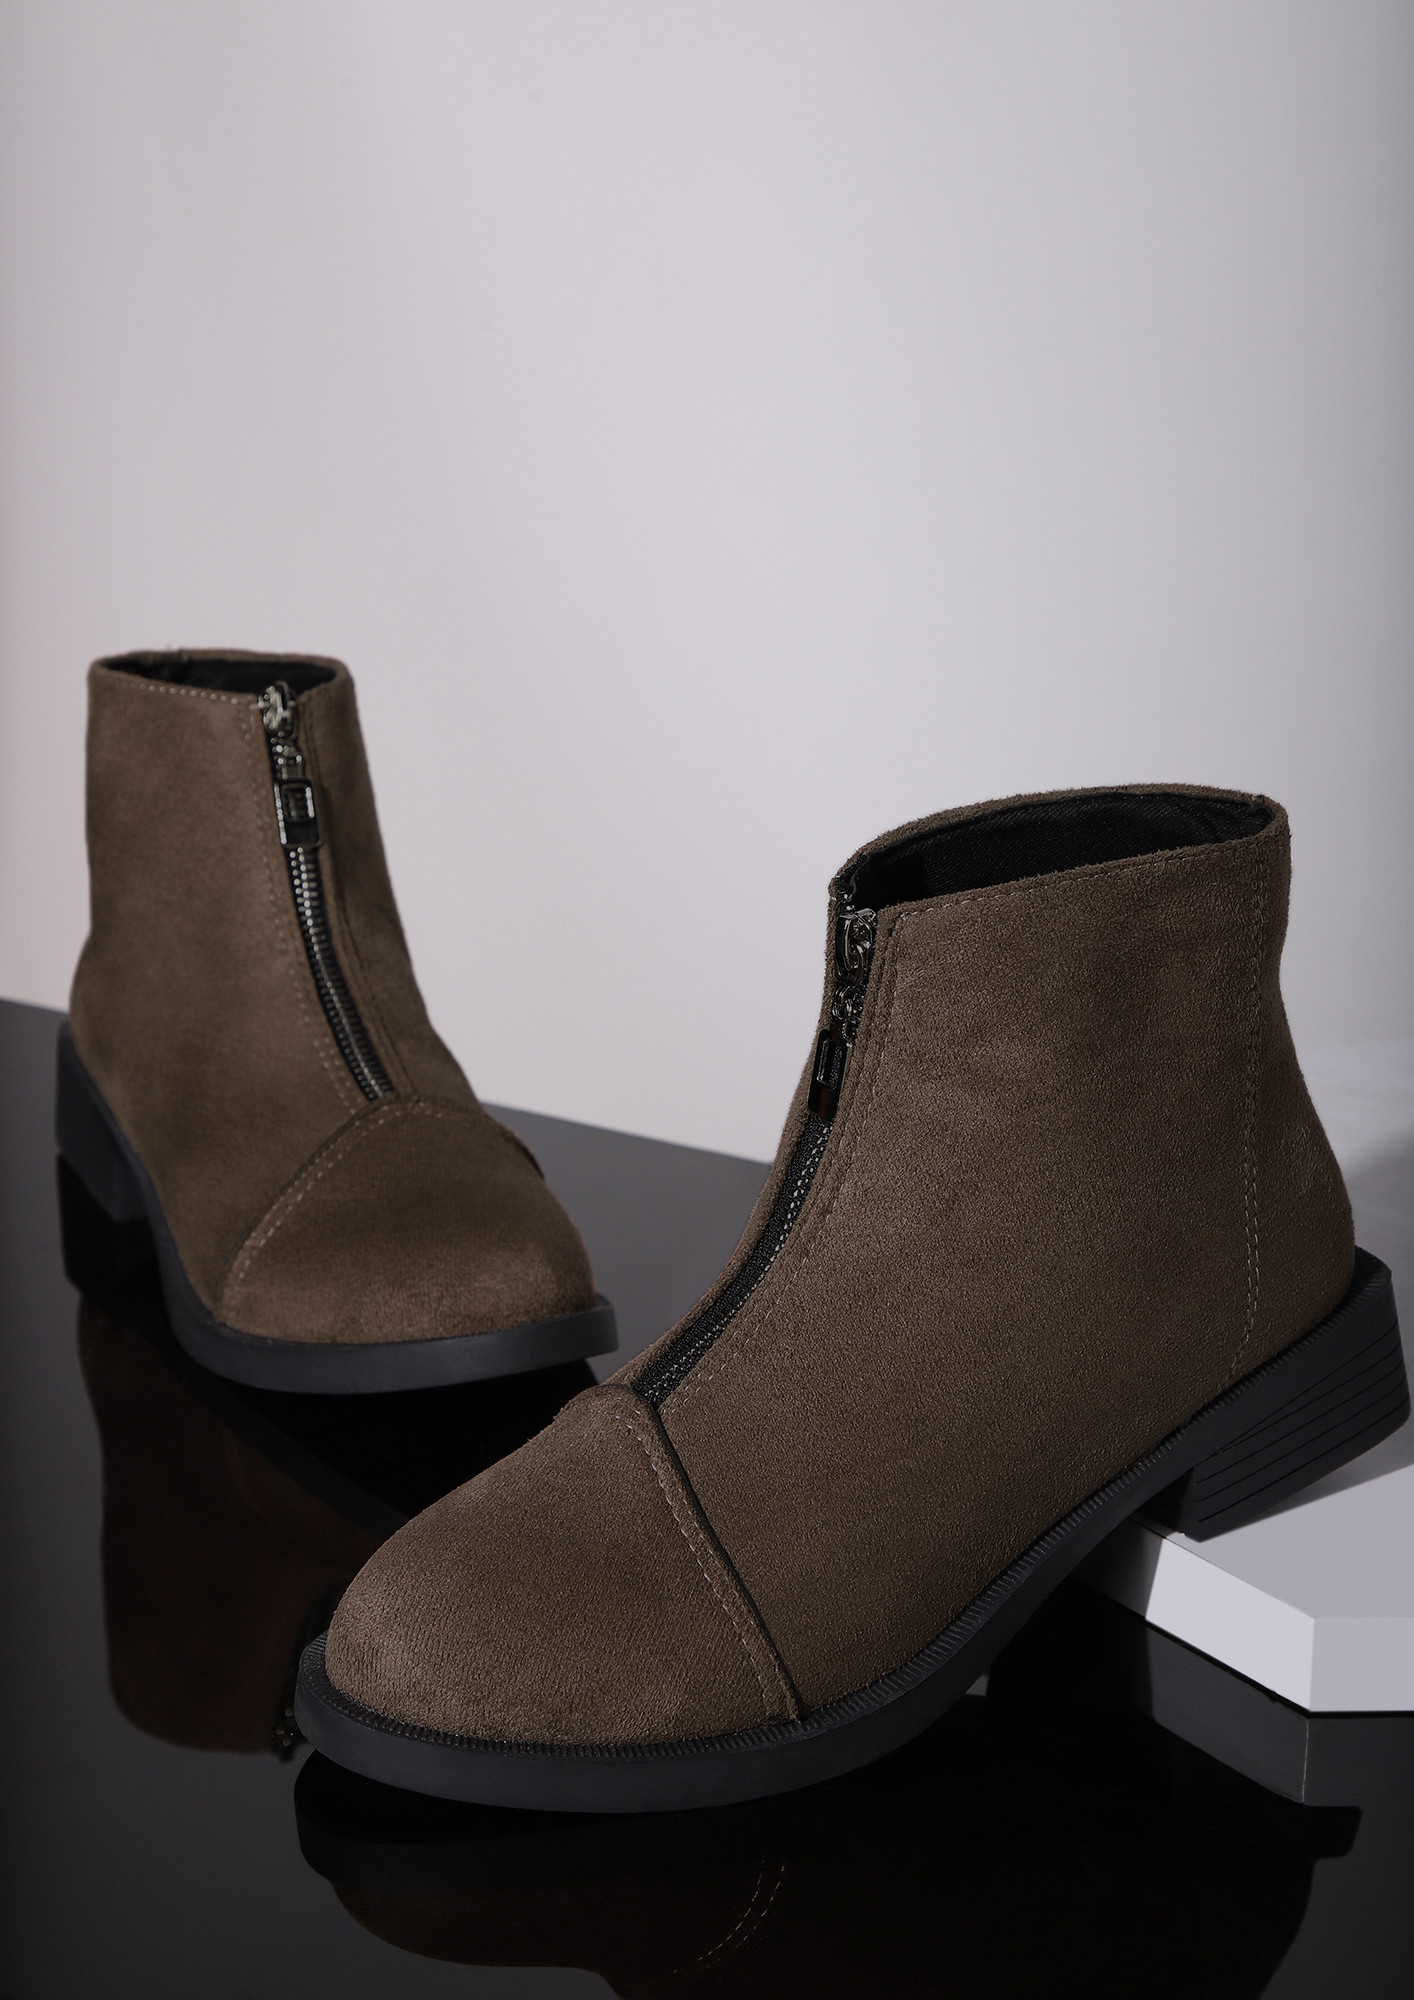 SLIP OF THE ZIP BROWN ANKLE BOOTS